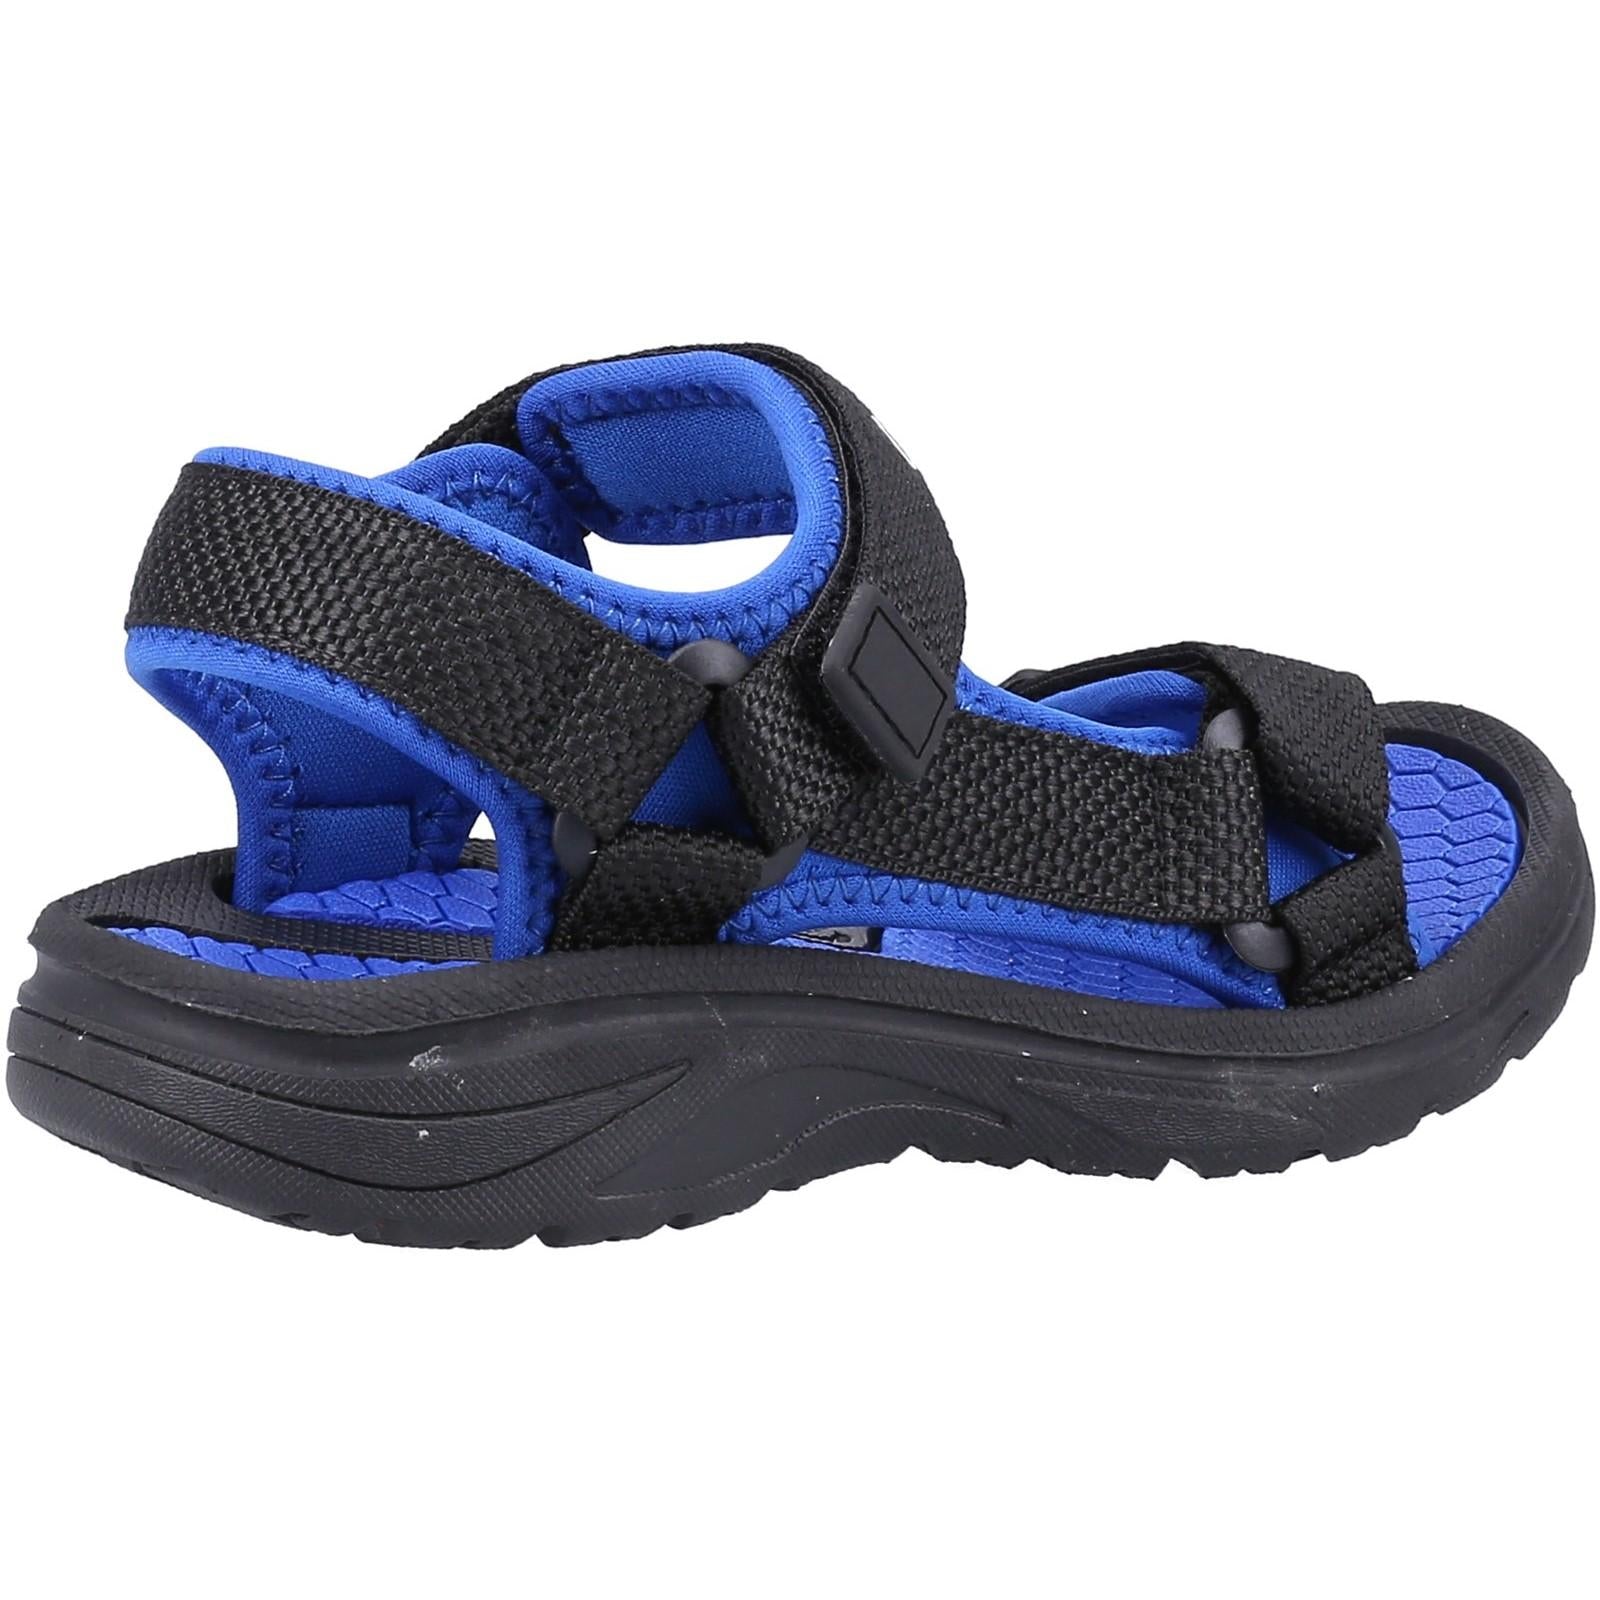 Cotswold Bodiam Recycled Sandal